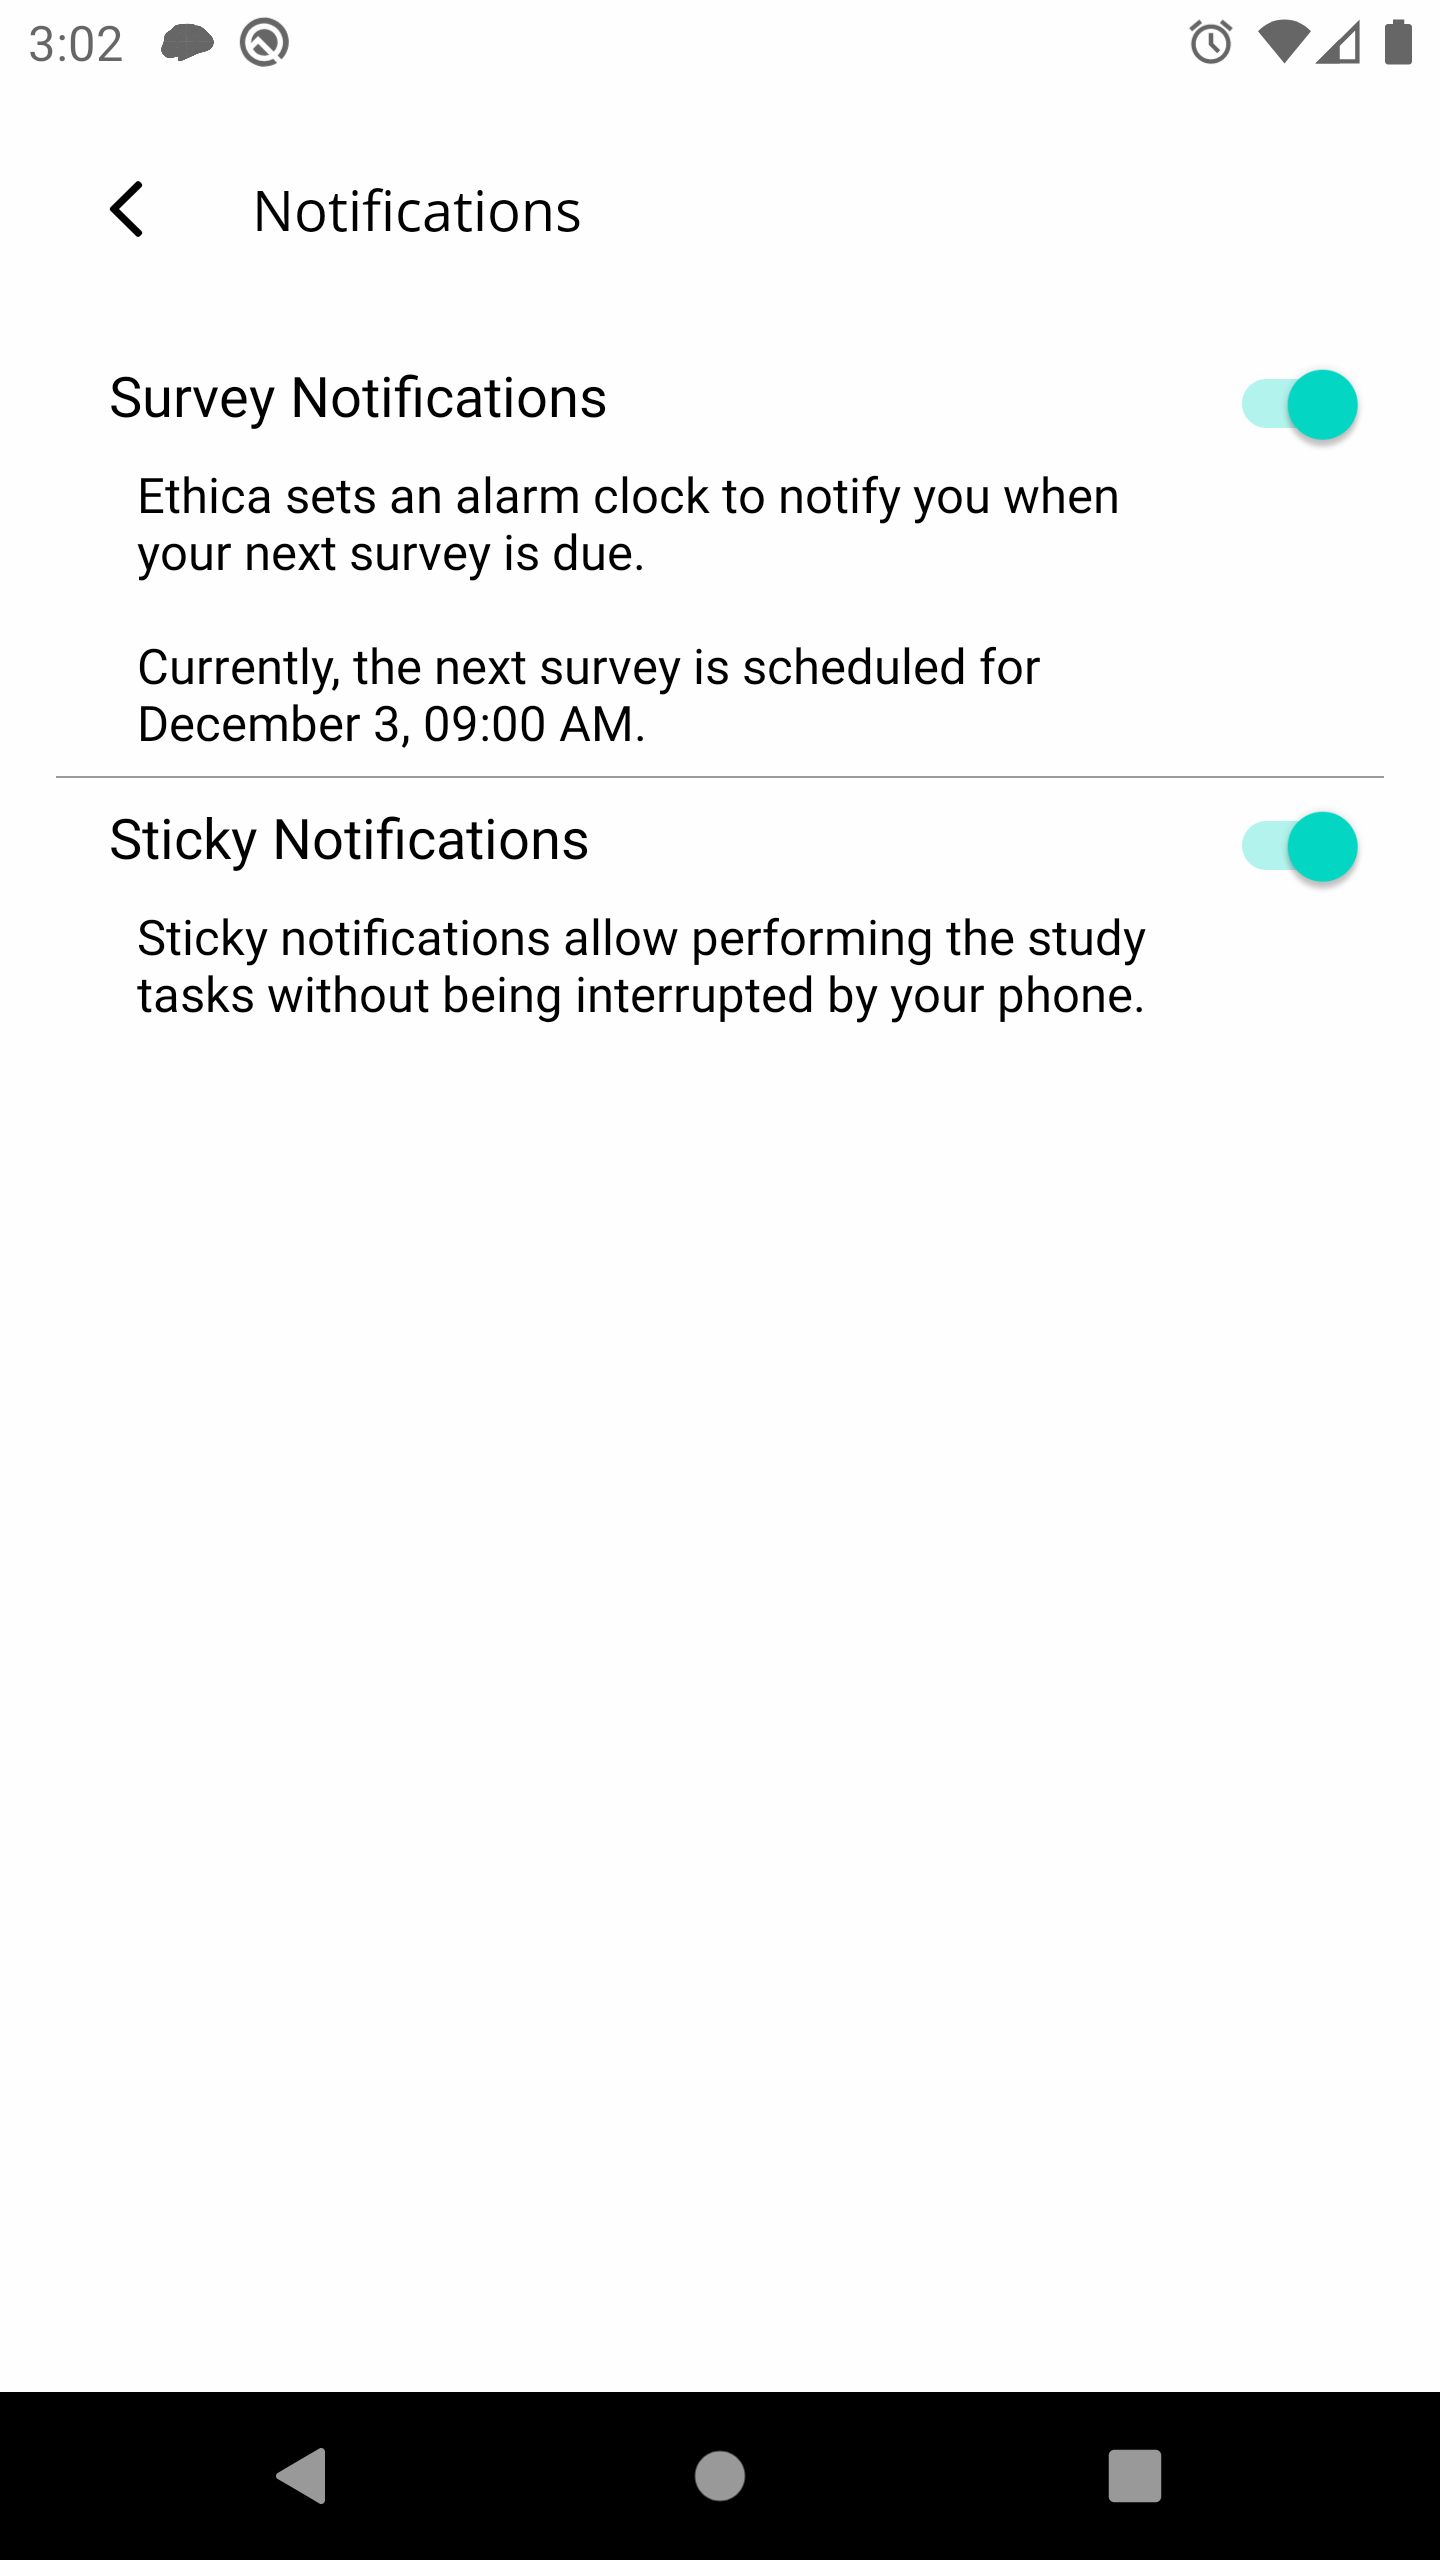 Avicenna App Allows Participants to Decide Whether Sticky Notifications Should be Used or Not